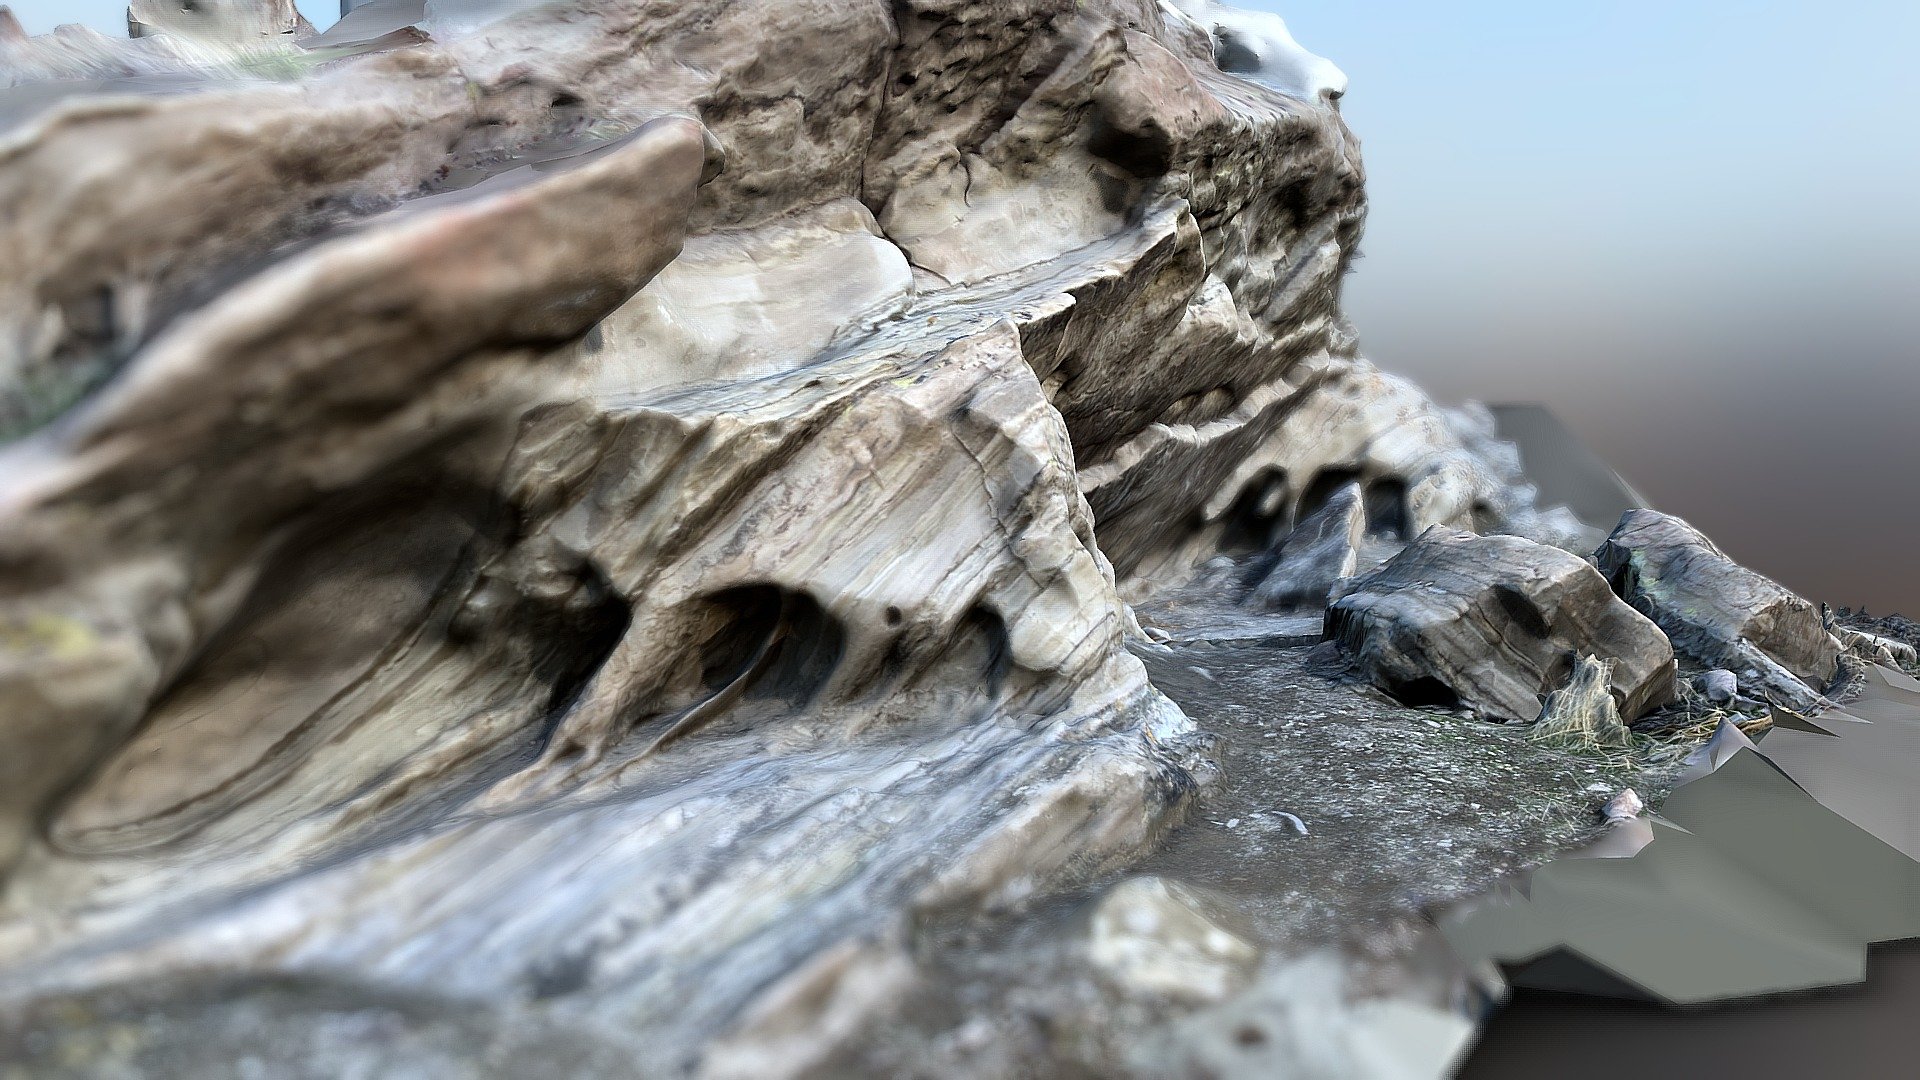 Created in RealityCapture by Capturing Reality from 620 images in 01h:16m:44s.

Taken in joshua tree California - Vasquez Rocks National Park Rocks Outcrop Scan - Download Free 3D model by Austin Beaulier (@Austin.Beaulier) 3d model